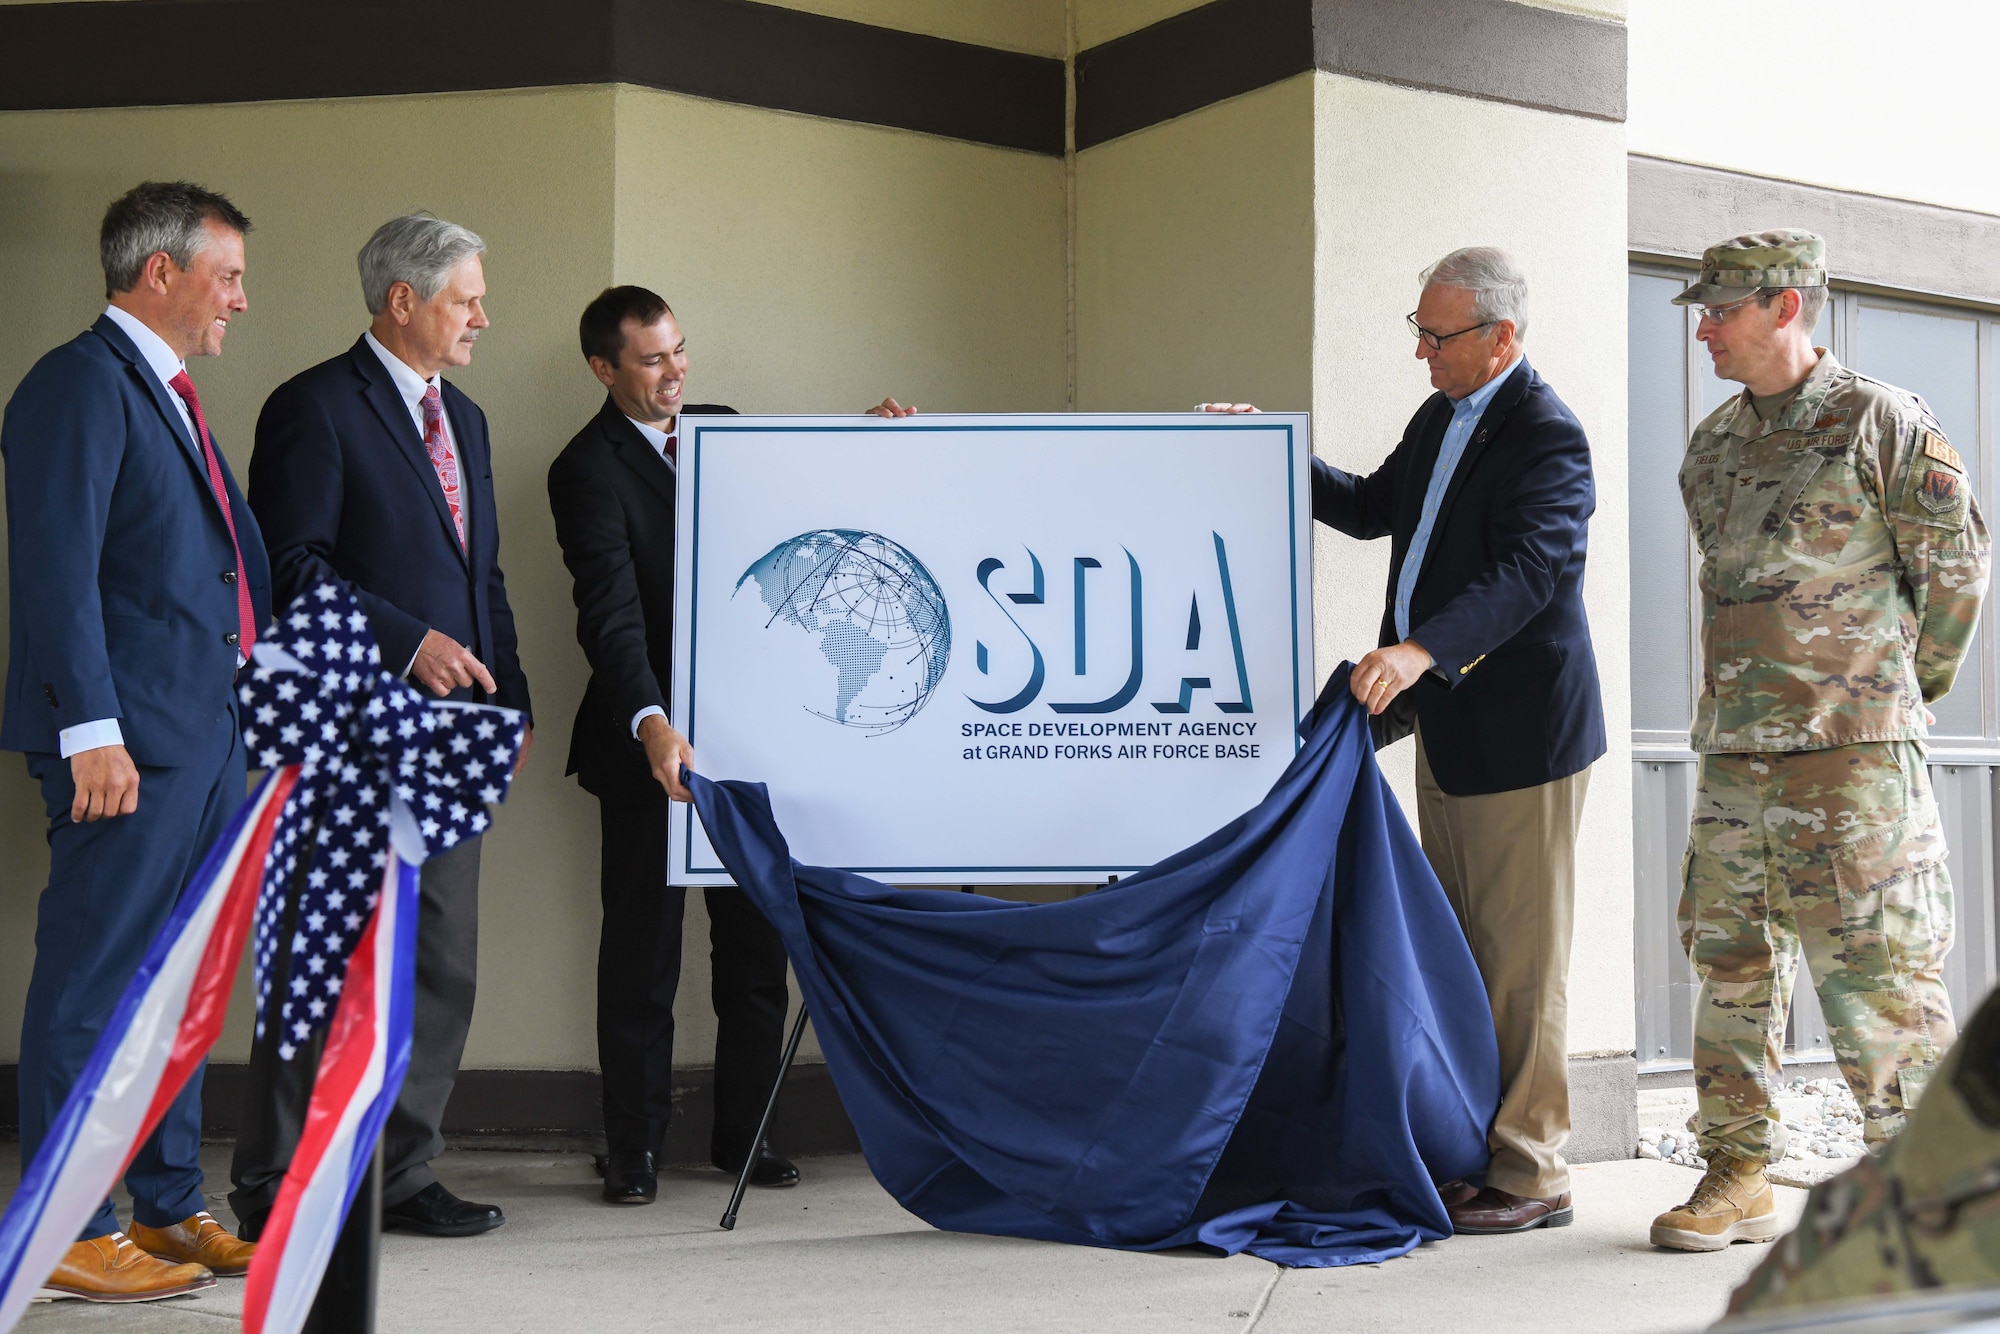 Derek Tournear, Space Development Agency director, and Sen. Kevin Cramer (R-ND), unveil the SDA sign during a Space Development Agency ribbon-cutting ceremony June 28, 2022, at Grand Forks Air Force Base, North Dakota. Grand Forks AFB was selected as the future home of Space Development Agency’s first ground operations and integration center, which will operate and control multiple-layer satellite operations for Tranche 1 of the National Defense Space Architecture. Space Development Agency is recognized as the Department of Defense’s constructive disruptor for space acquisition and will accelerate delivery of needed space-based capabilities to the joint warfighter to support terrestrial missions through development, fielding and operation of the National Defense Space Architecture. (U.S. Air Force photo by Senior Airman Ashley Richards)